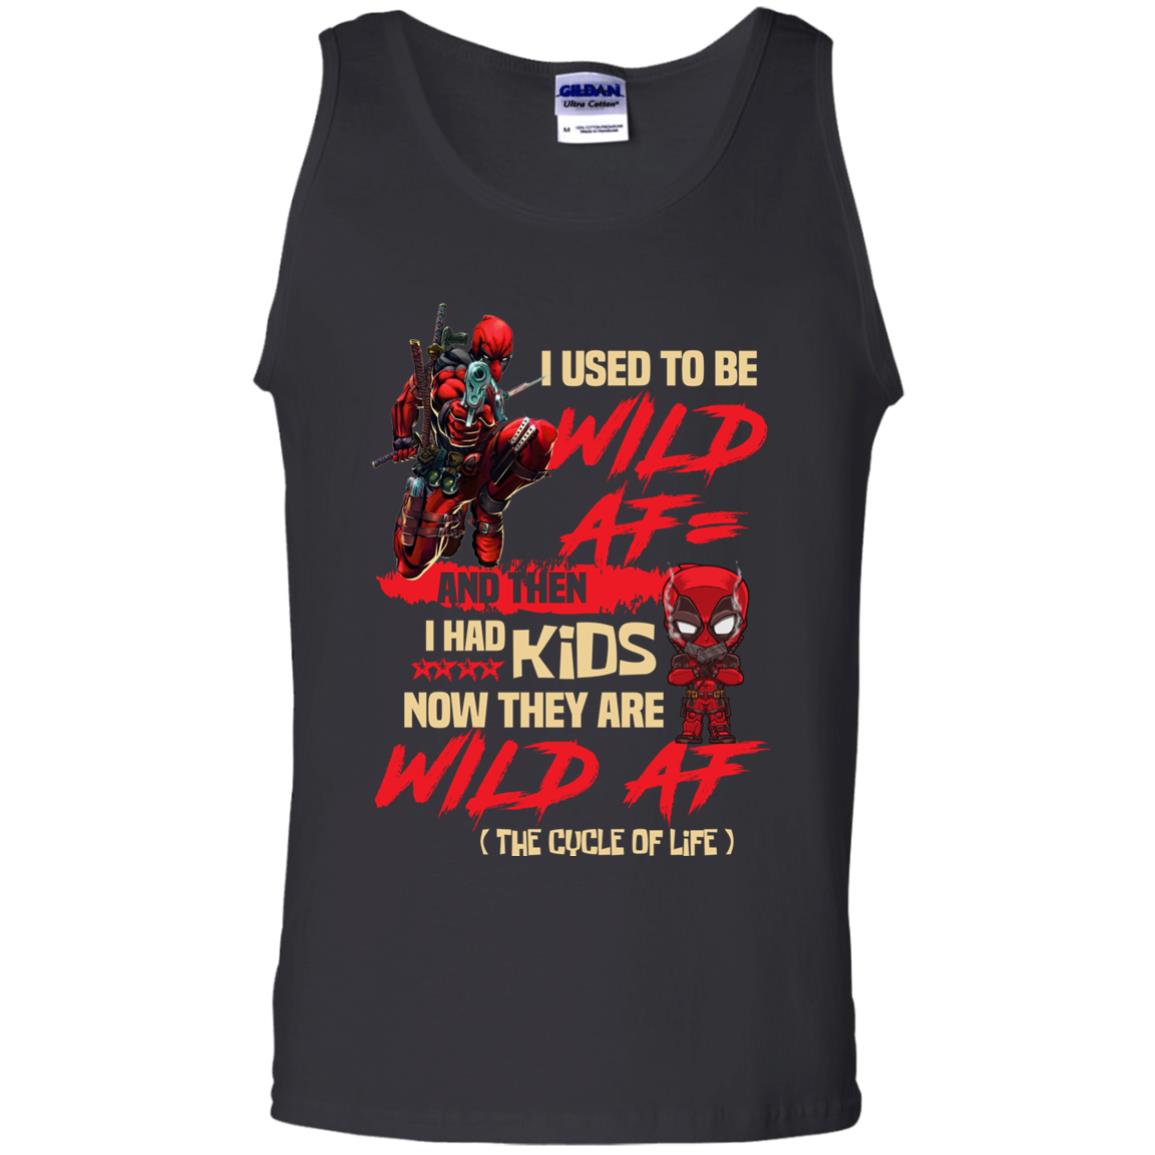 I Used To Be Wild Af And Then I Had Kids Now They Are Wild Af DeadpoolG220 Gildan 100% Cotton Tank Top